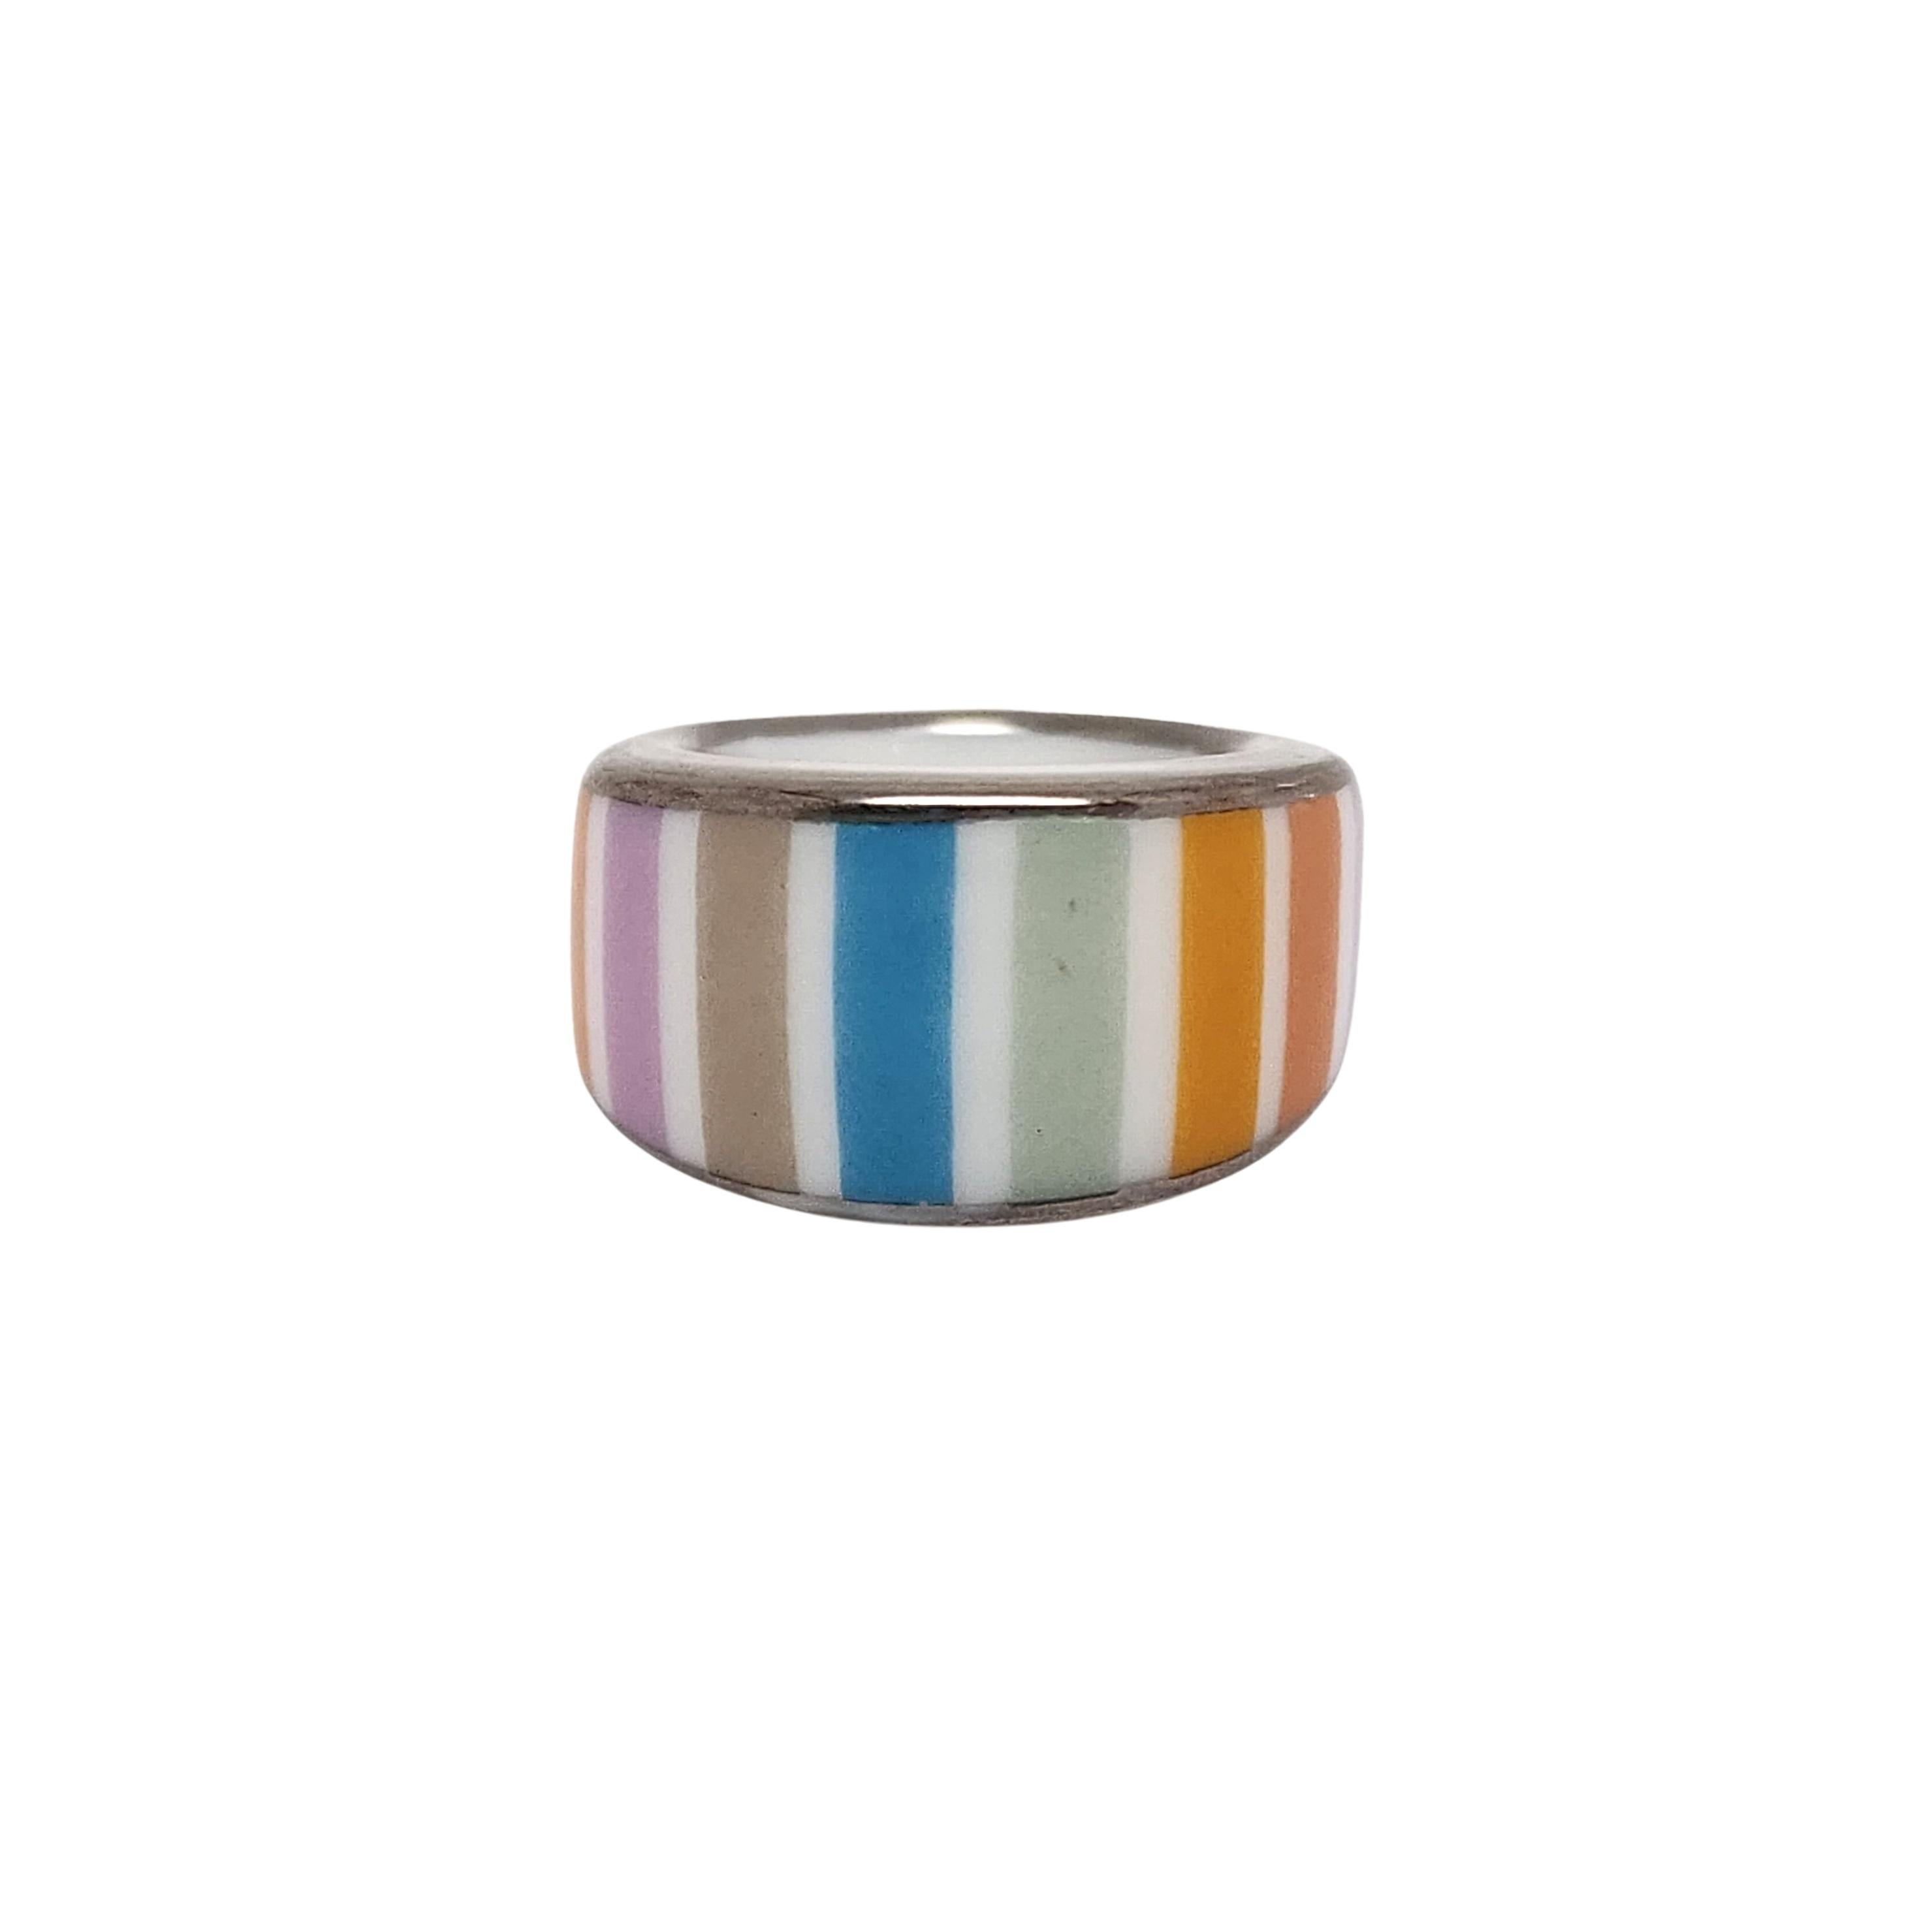 Silver and porcelain with enamel ring by Bernardaud of Paris.

Size 6.5

Beautiful ring featuring multi color enamel striped porcelain.

Measures approx 13.5 wide at front (approx 3/8